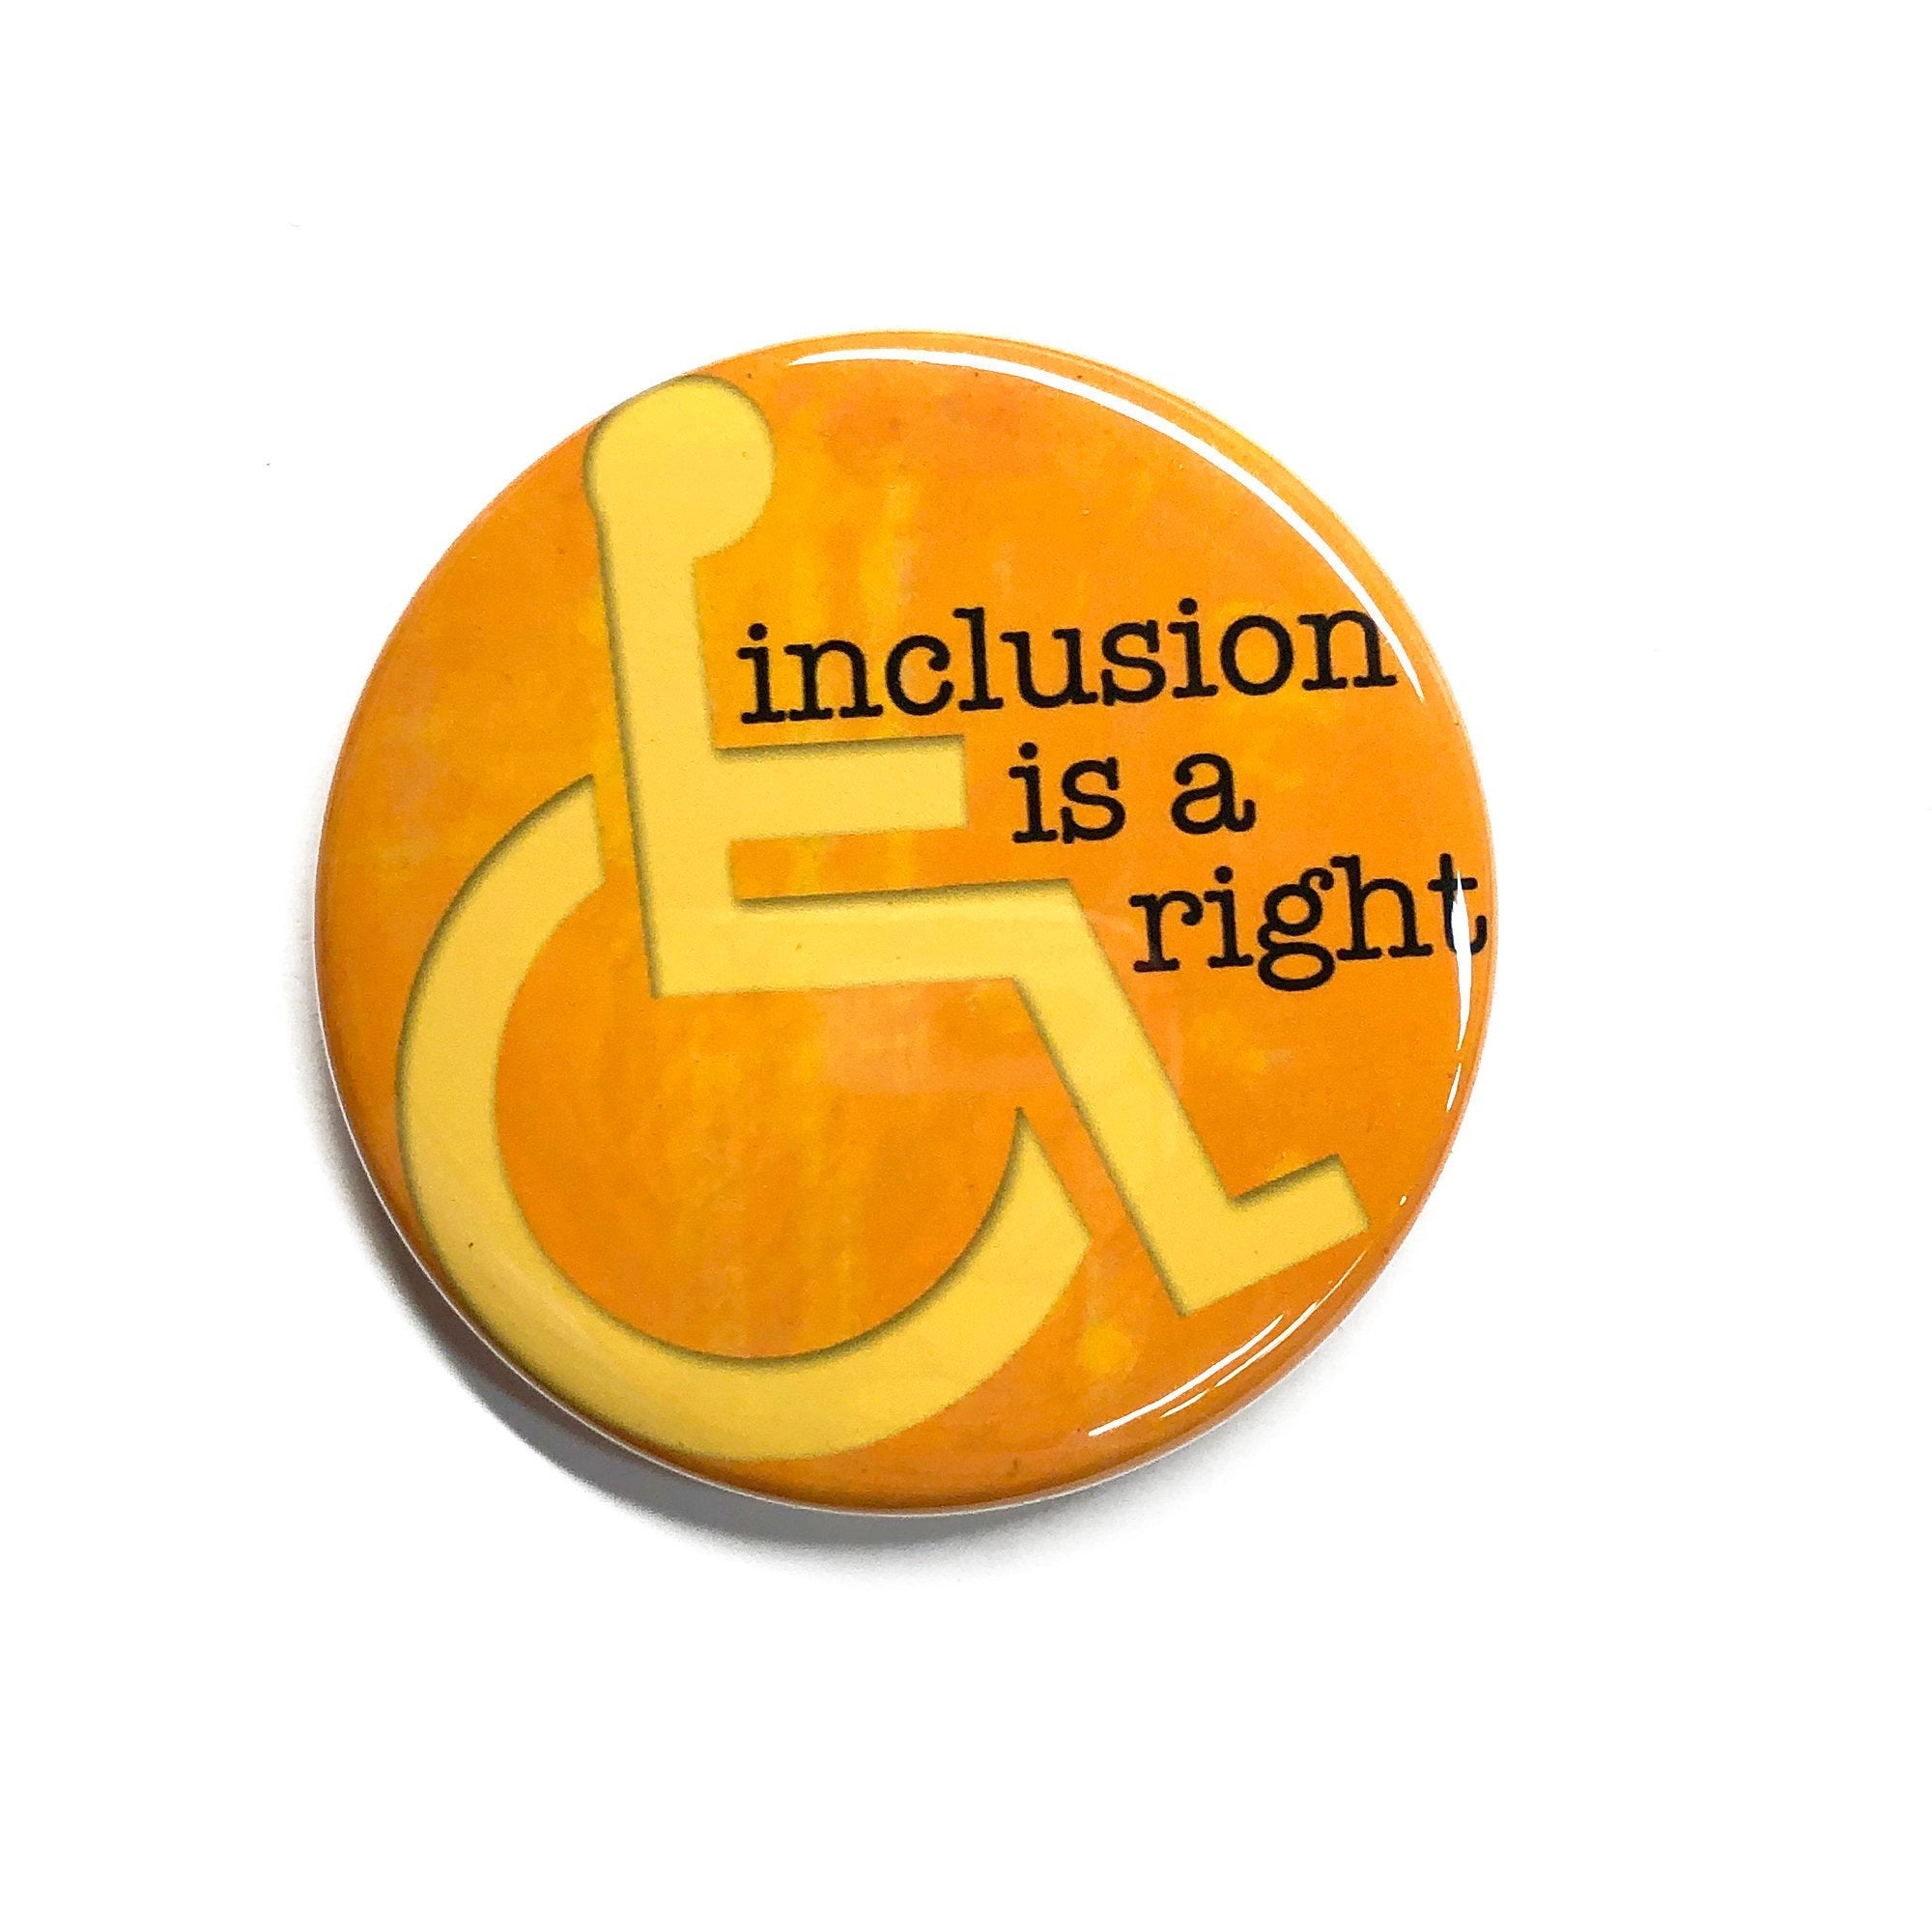 Inclusion is a Right - Disability Rights Pin or Magnet